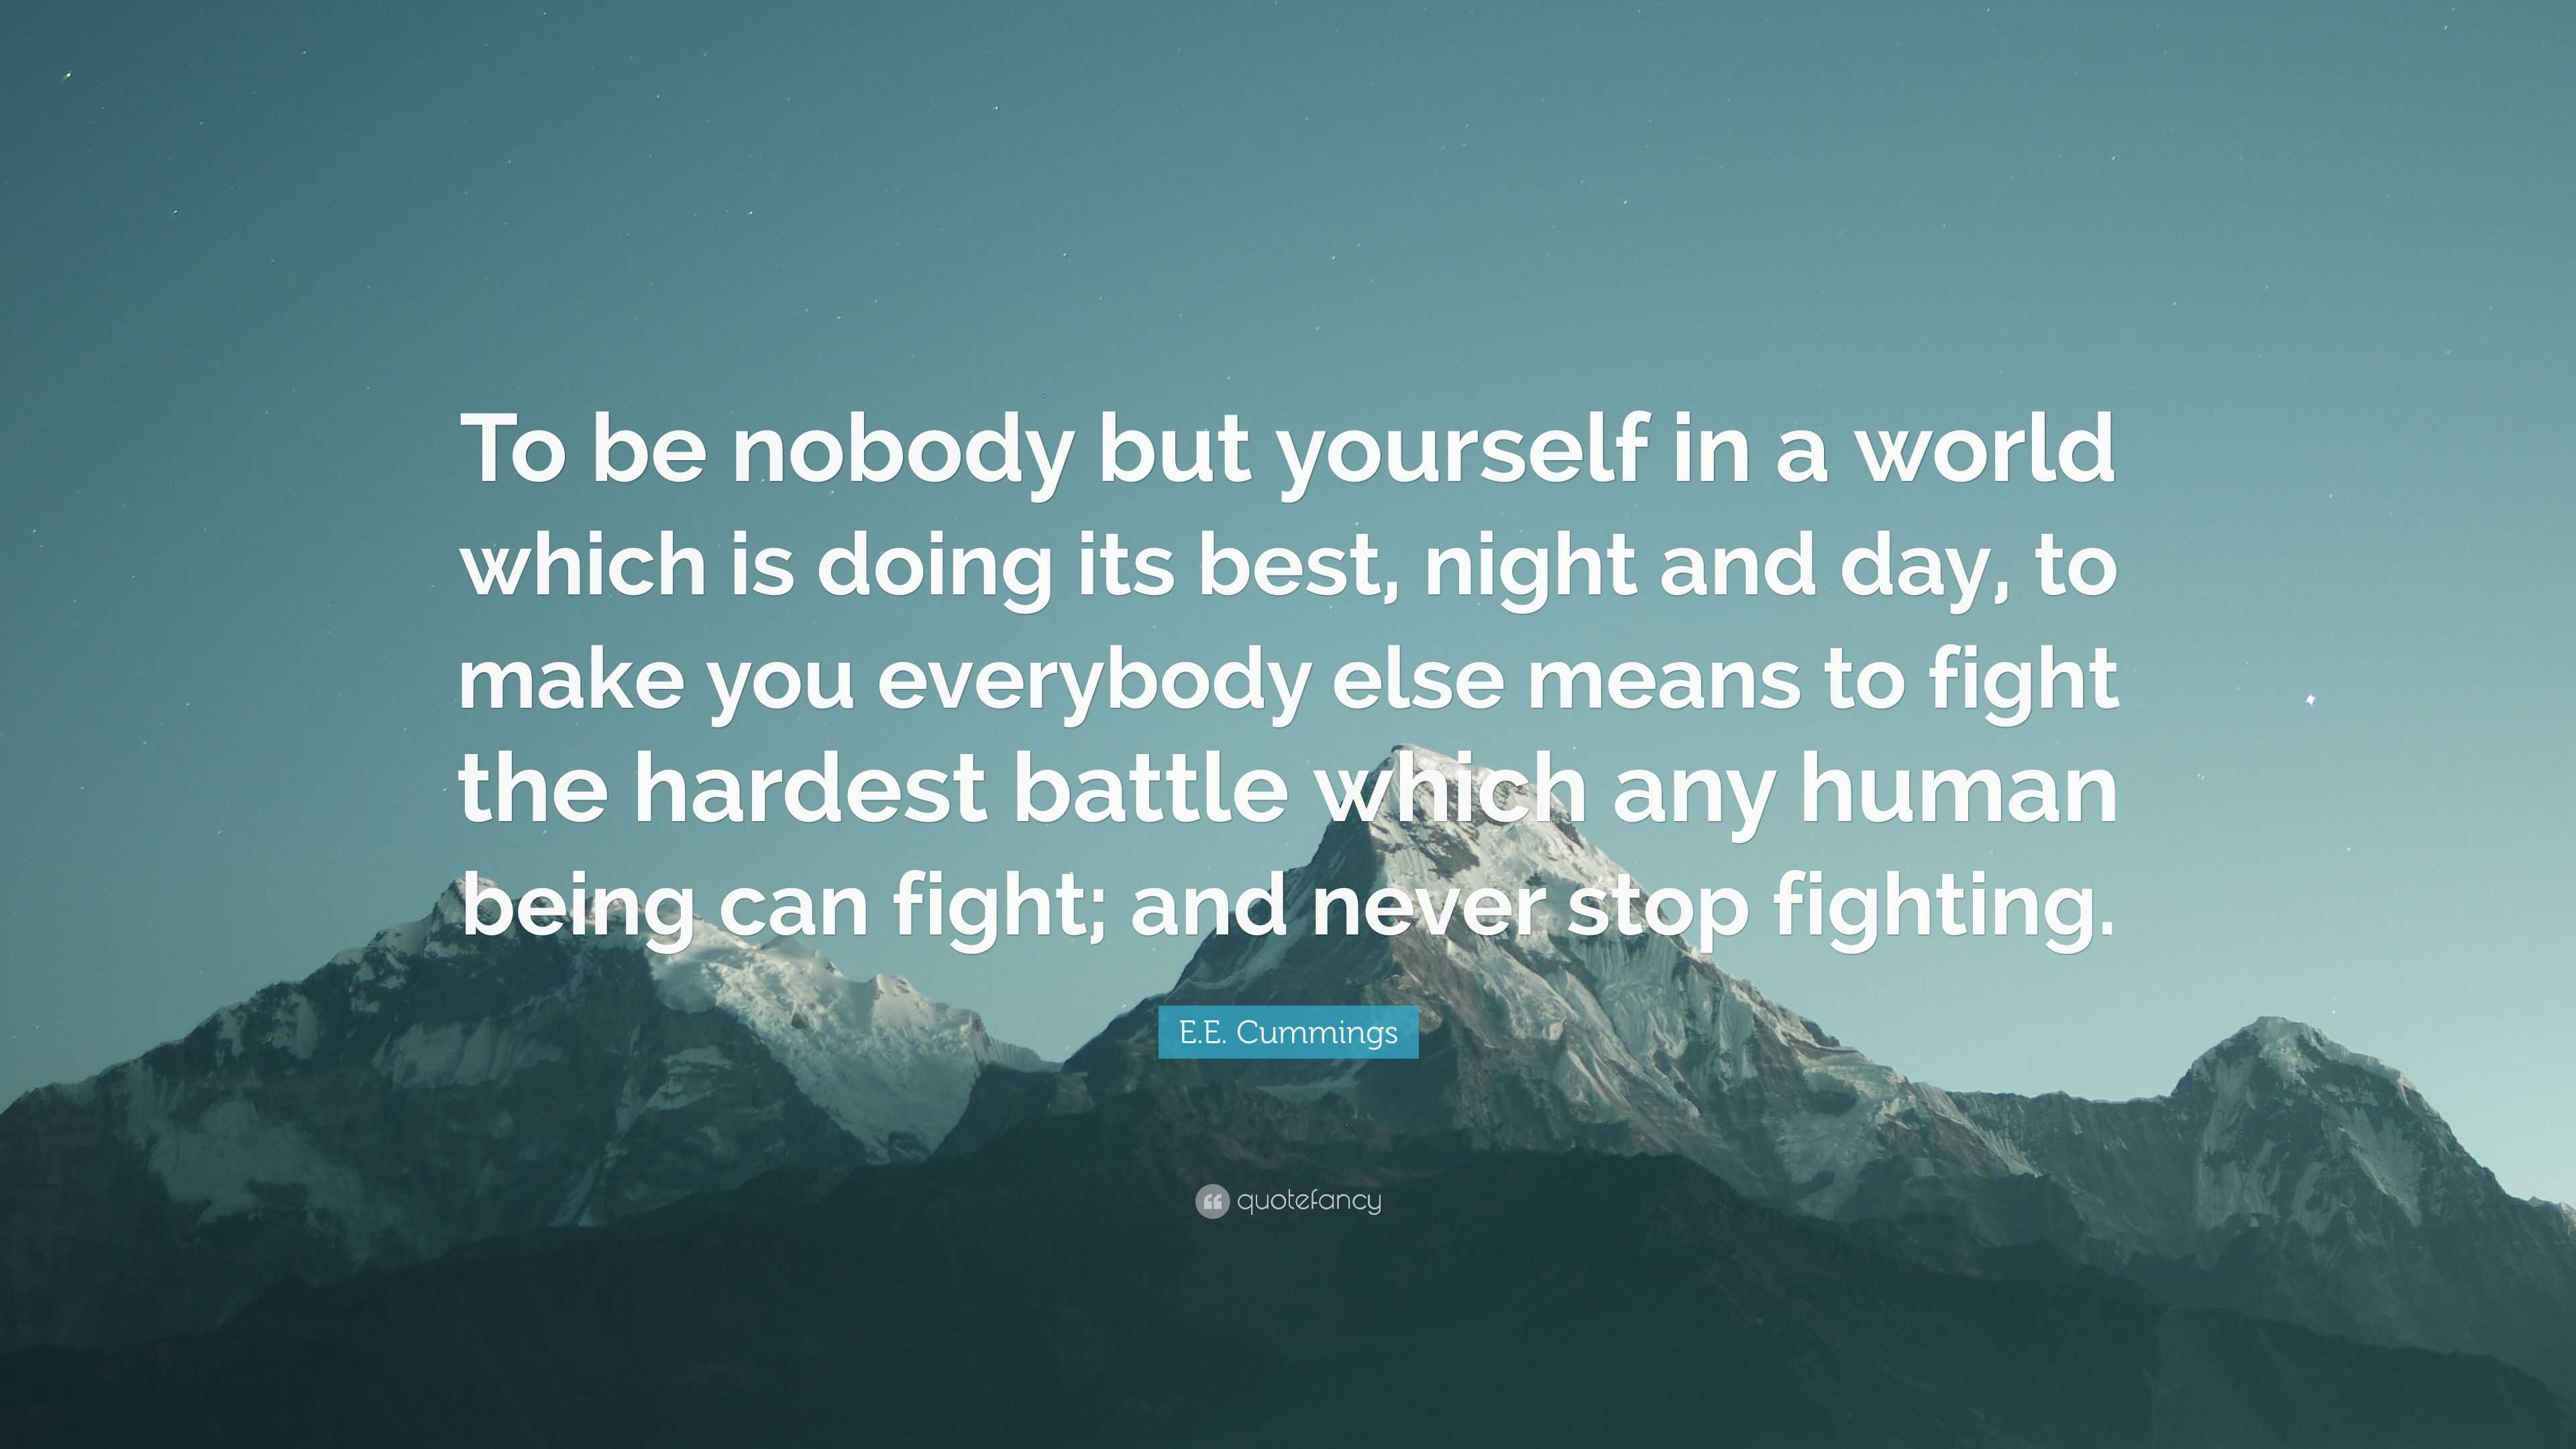 E.E. Cummings Quote: “To be nobody but yourself in a world which is doing its best ...